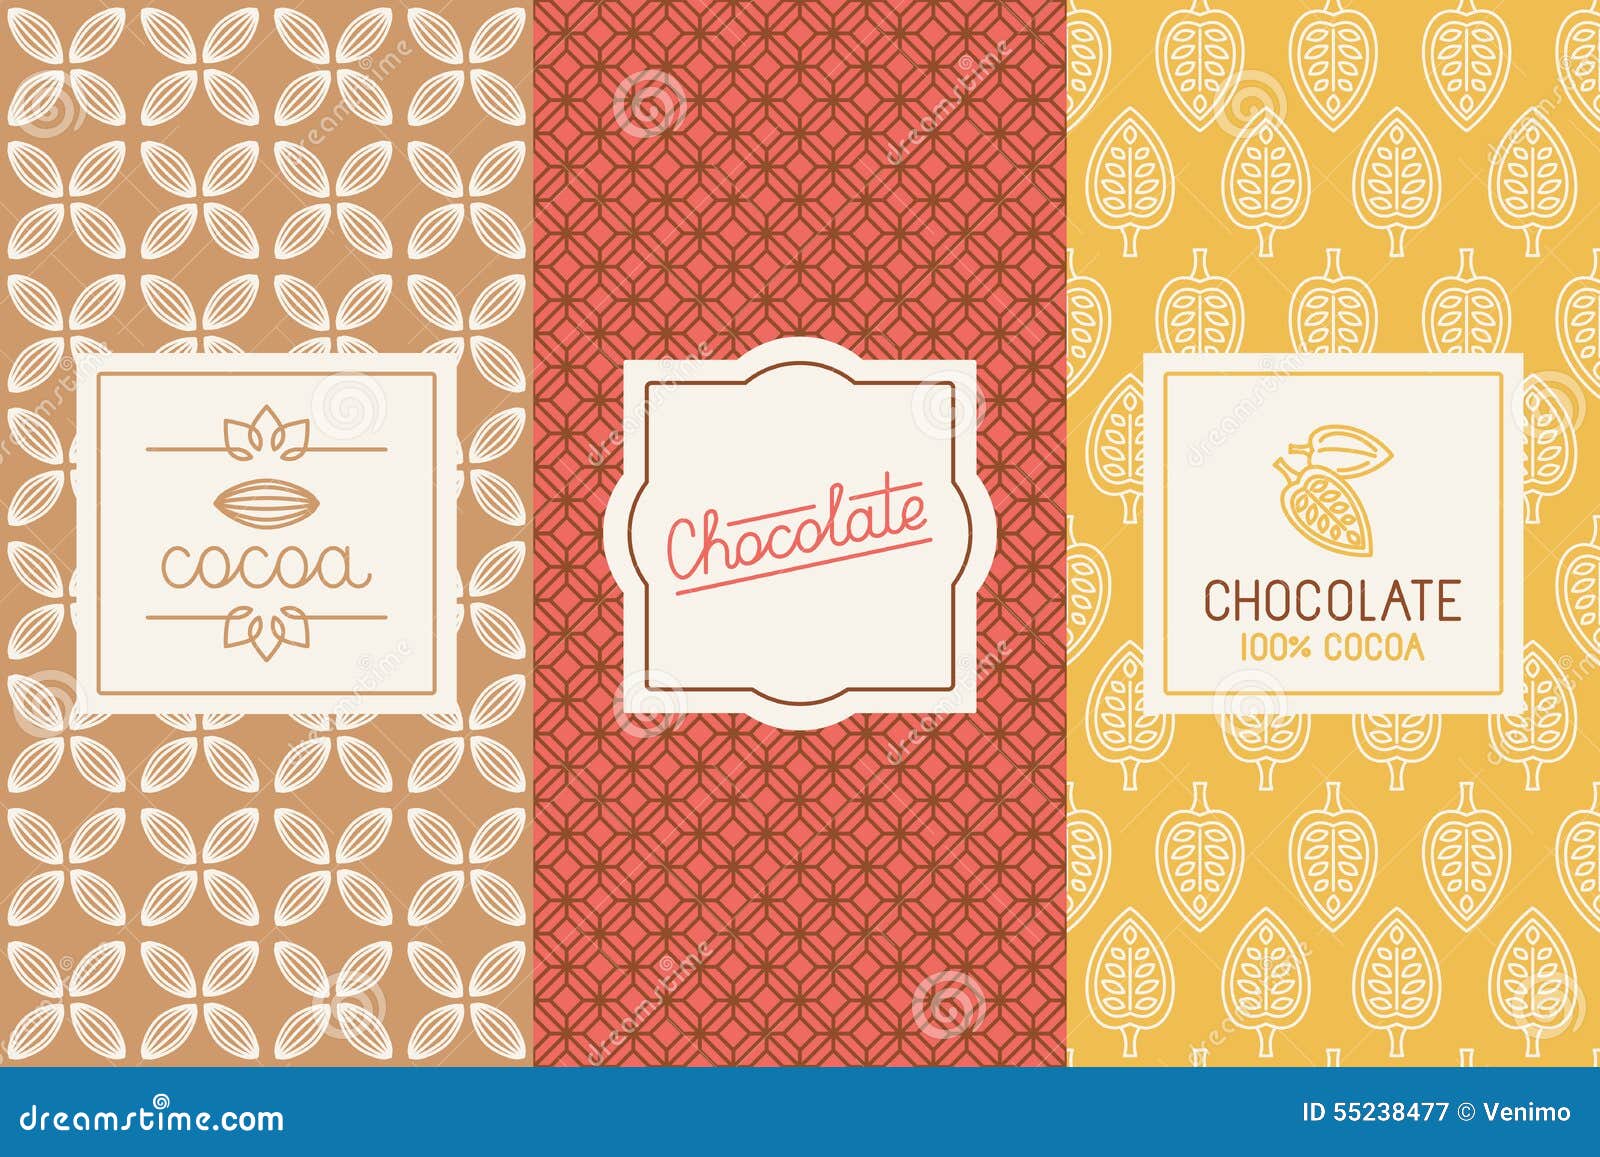 Download Chocolate And Cocoa Packaging Stock Vector - Illustration ...